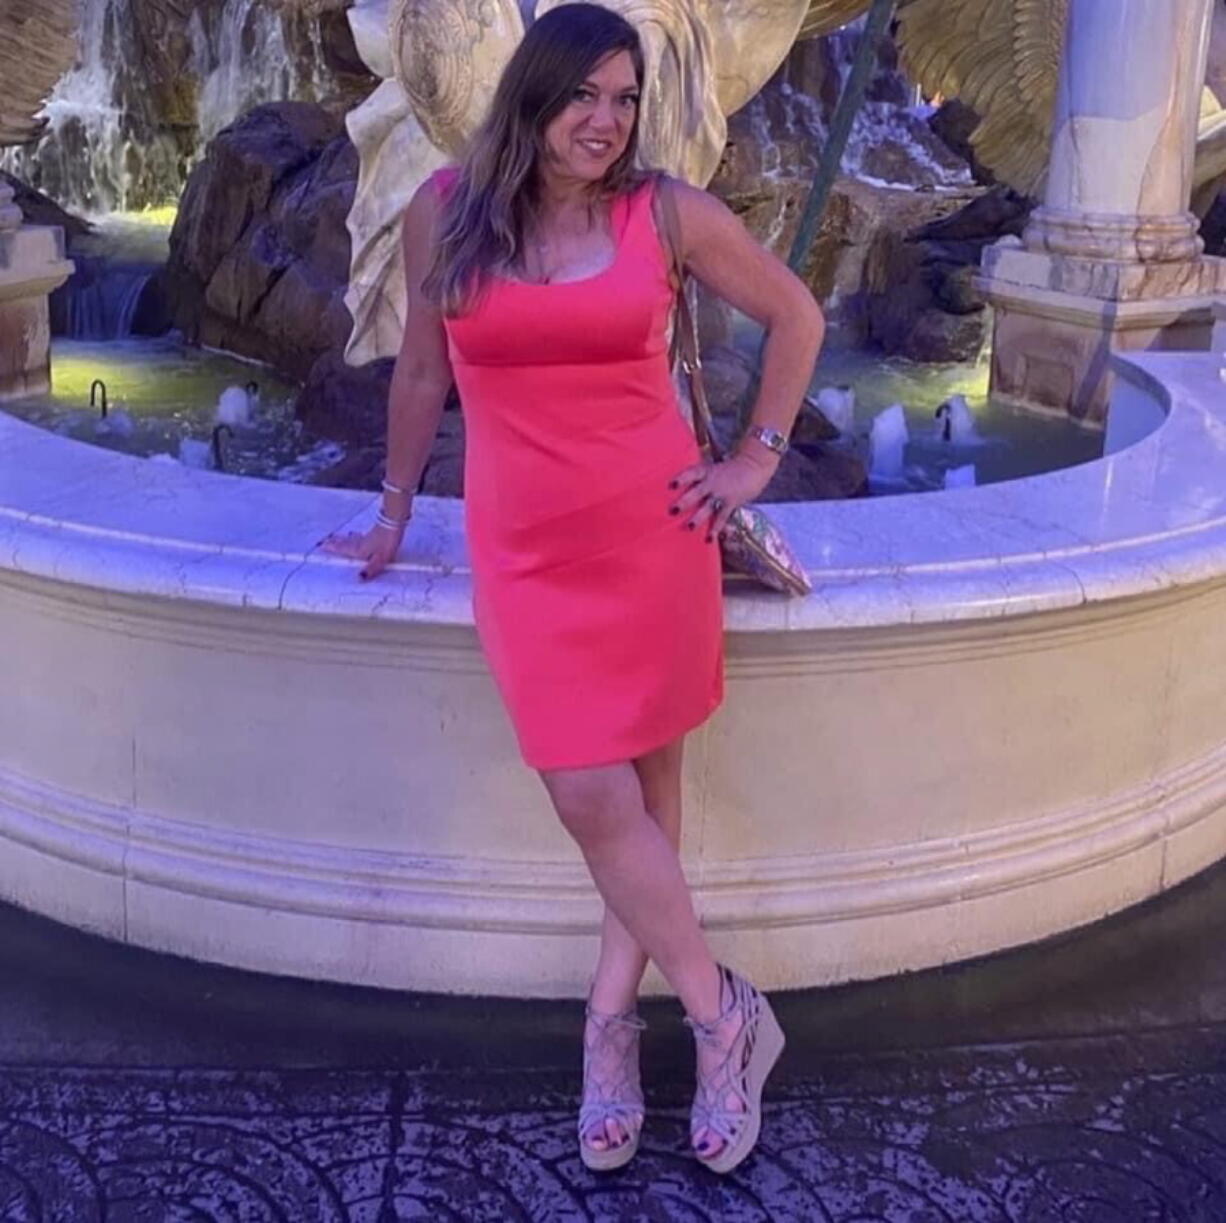 This June 1, 2021 photo provided by Liz Segel shows Estelle Hedaya at Caesars Palace in Las Vegas. Ikey Hedaya is still waiting for closure almost a month after the Surfside condo collapse. He has given his DNA, talks frequently with the medical examiner and even reluctantly visited the collapse site to see for himself what is being done to find his big sister. Fifty-four-year-old Estelle Hedaya appears to be the only missing victim yet to be identified after the June 24 collapse.